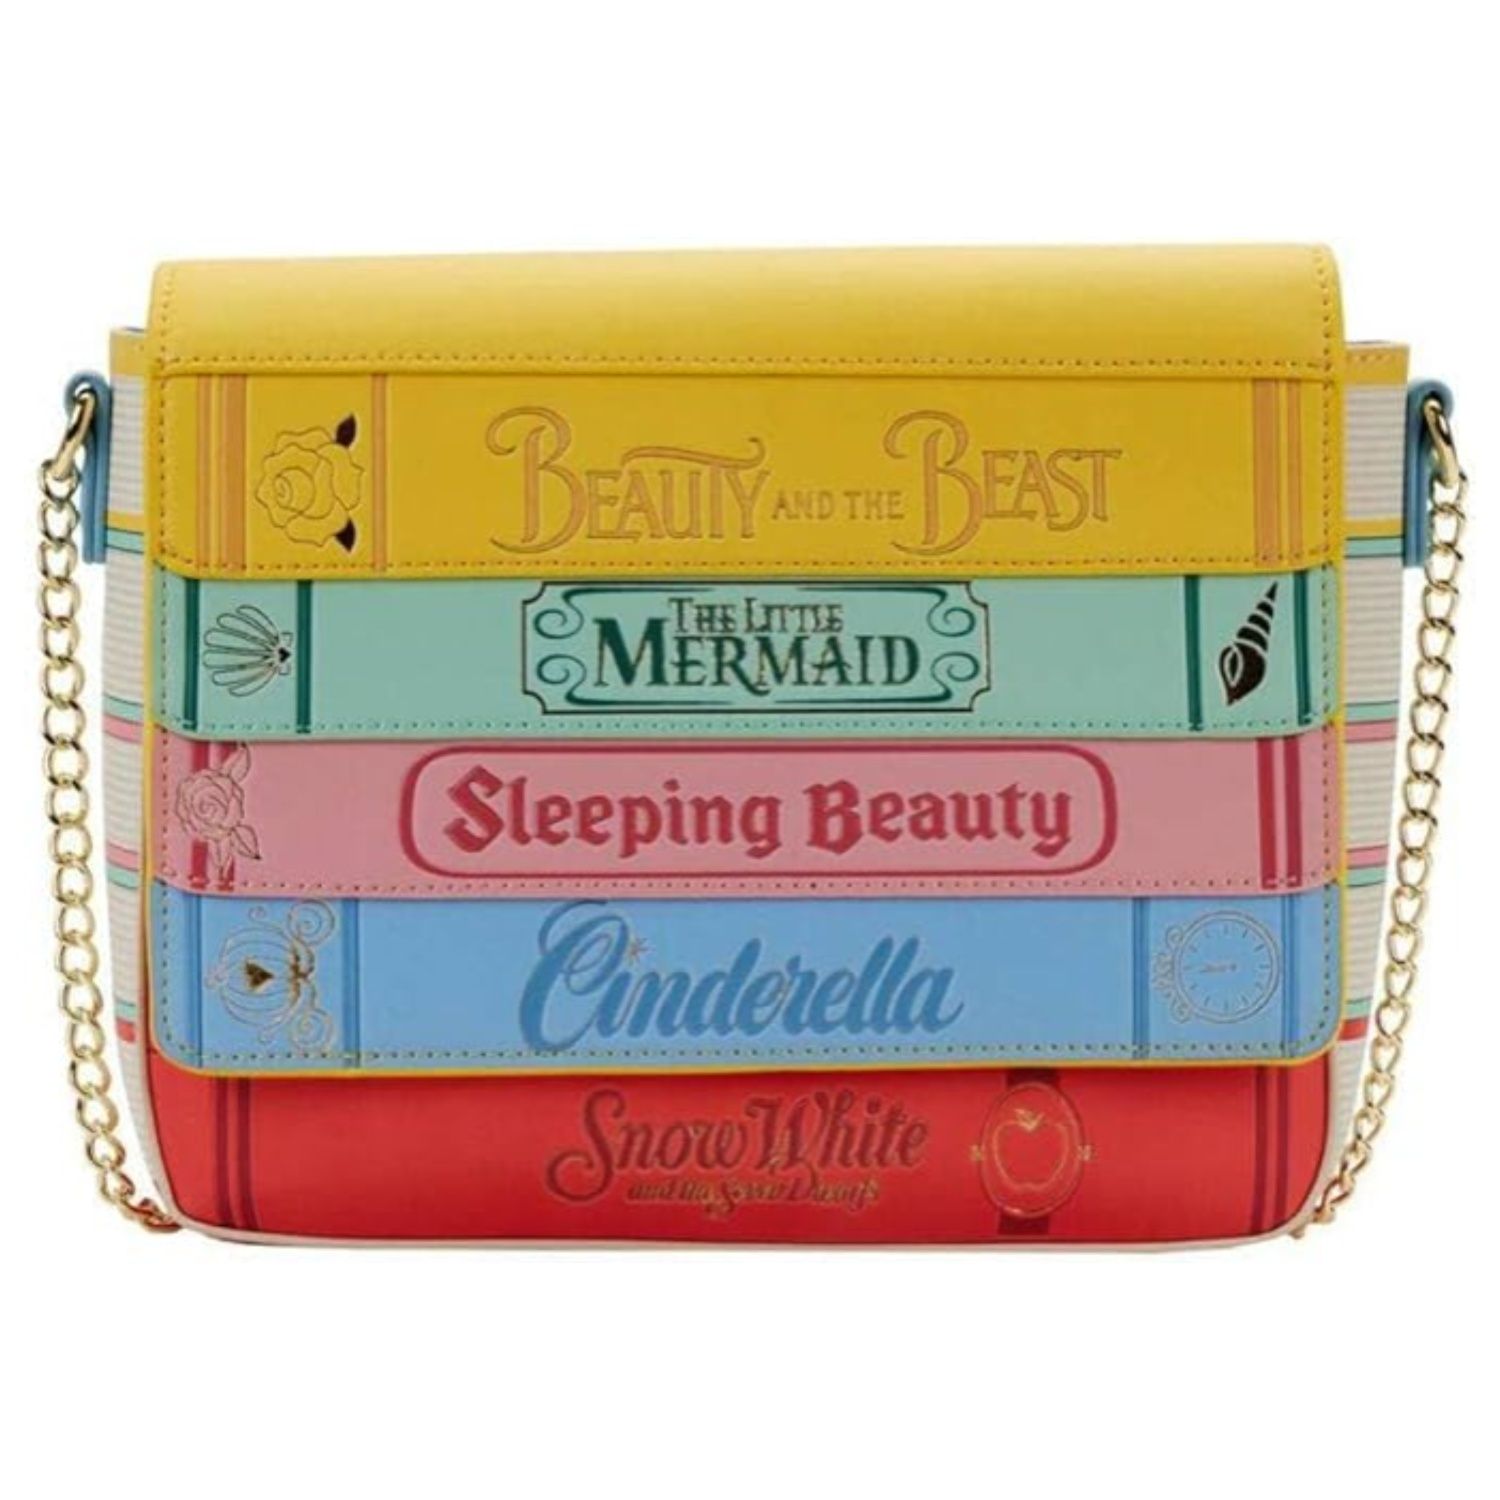 9 Disney Fashion Bags Under $100: Purses, Cell Phone Bags and Totes - The  Bradford Exchange